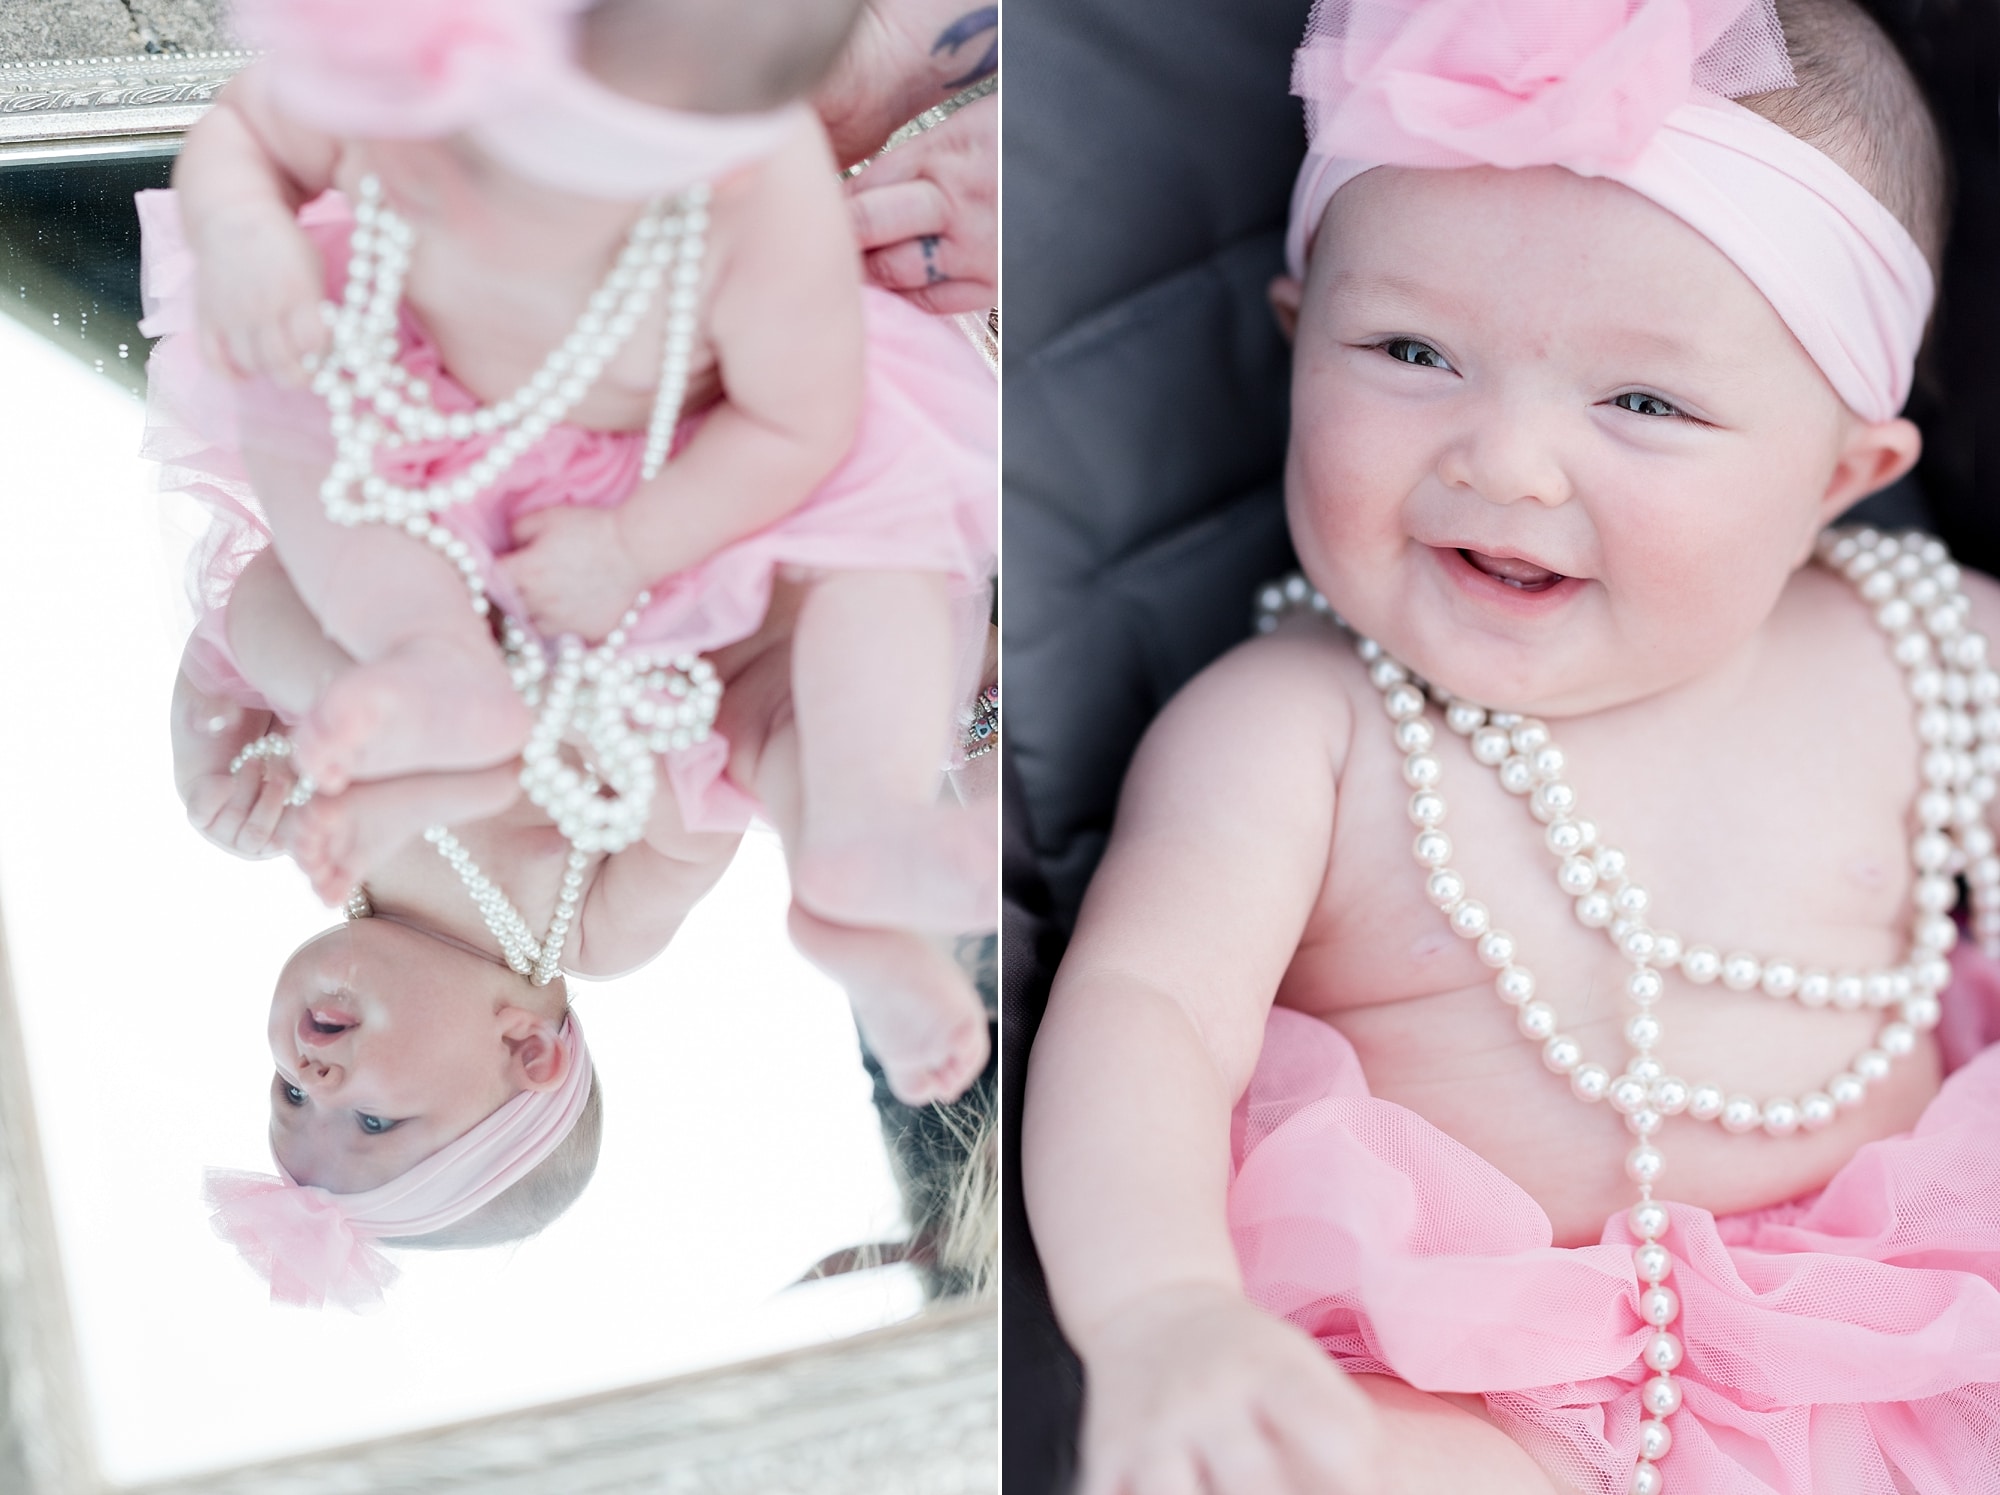 Baby dressed in tutu and pearls